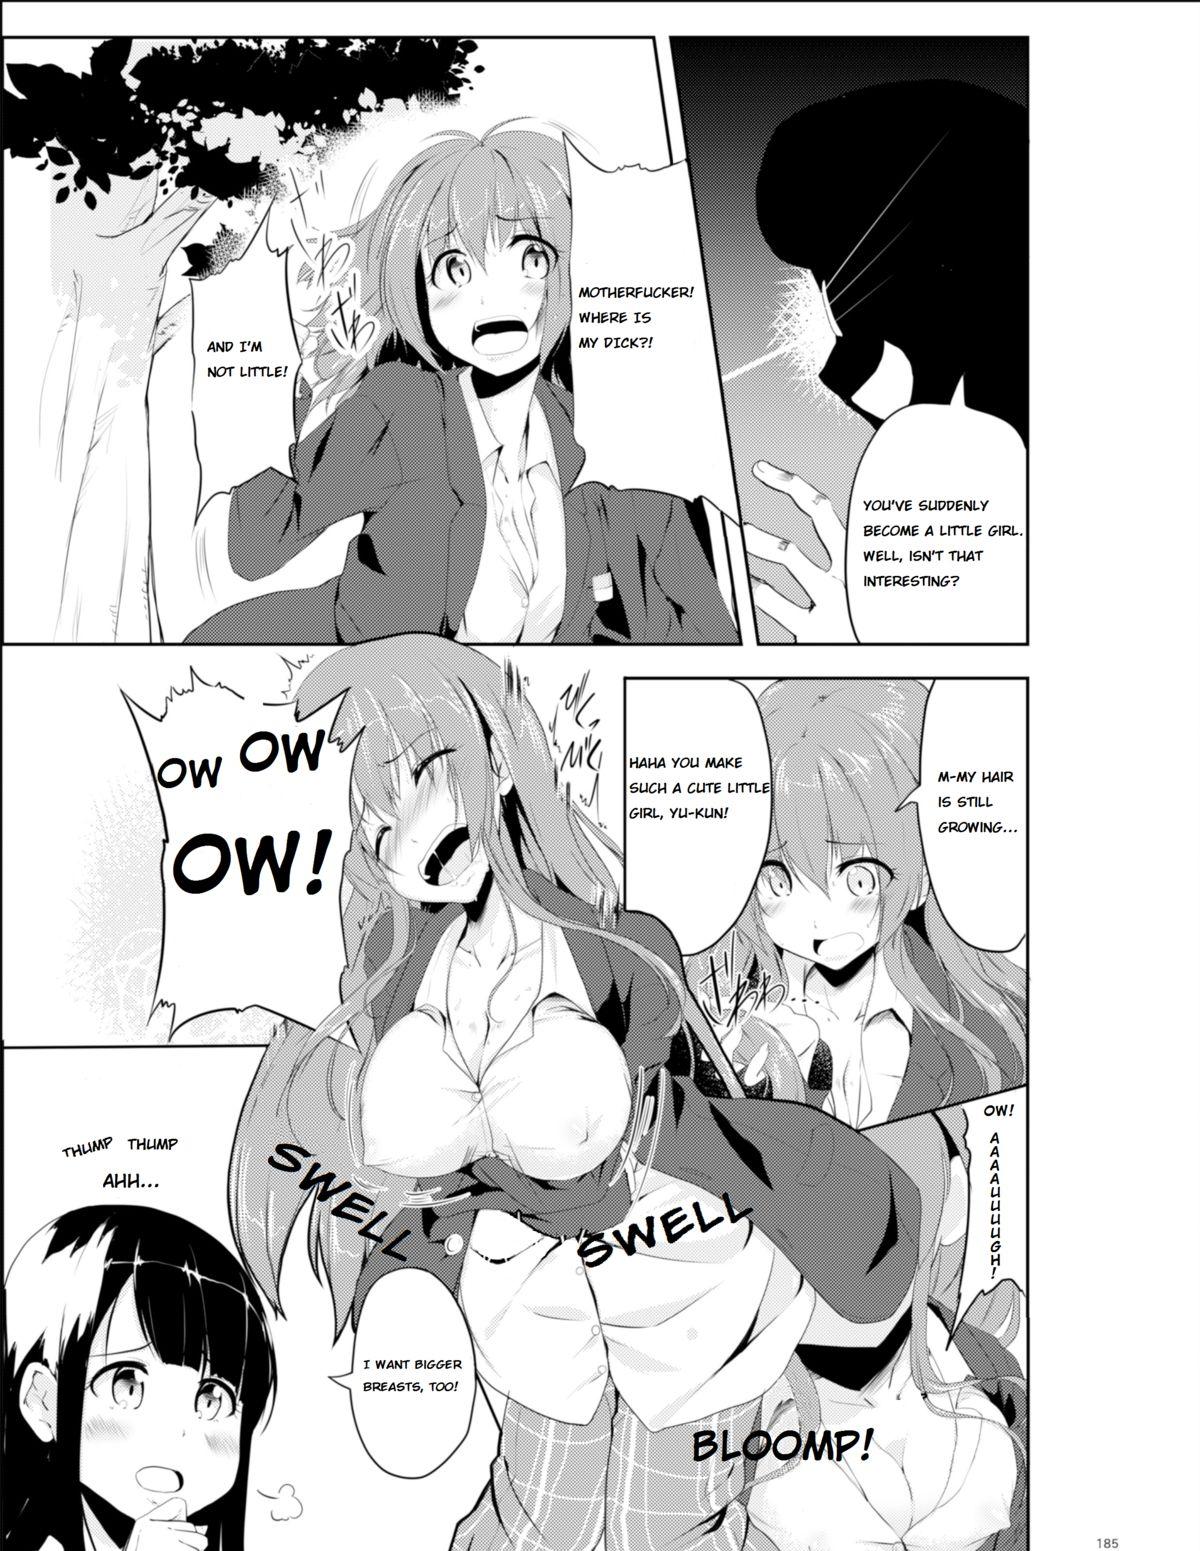 Porno 18 [TSF no F (Hyouga.)] "The Painted Lady" (English) - Ongoing Porno Amateur - Page 5